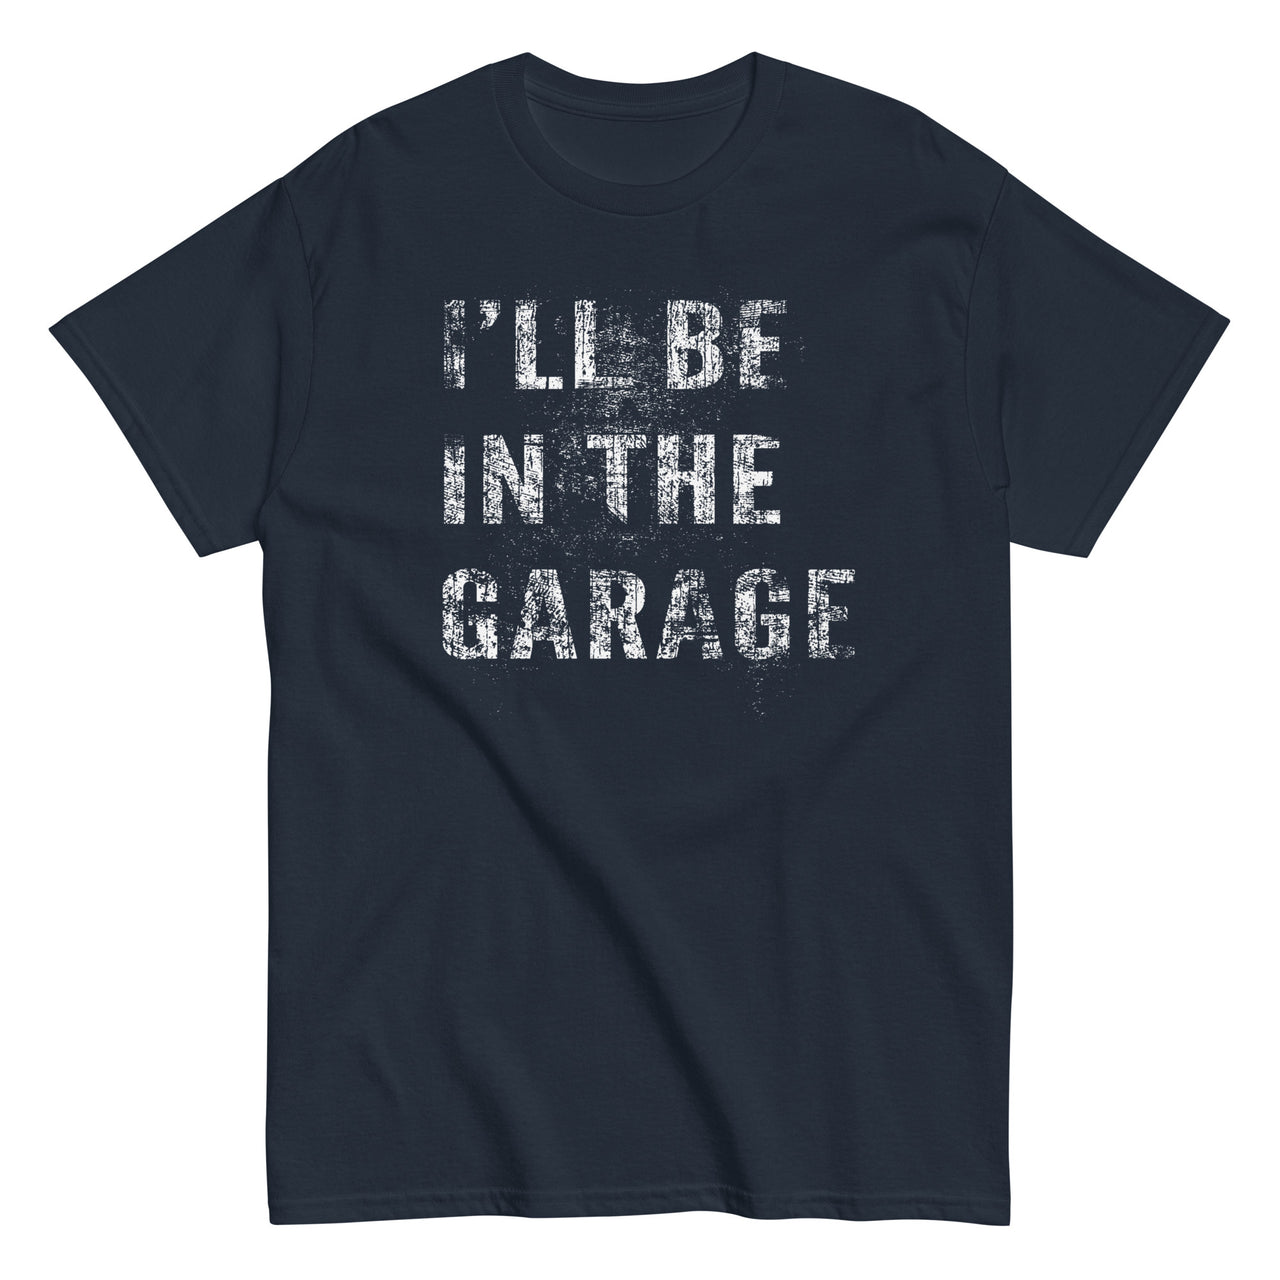 I'll Be In The Garage, Mechanic Shirt , Car Enthusiast T-Shirt - in navy